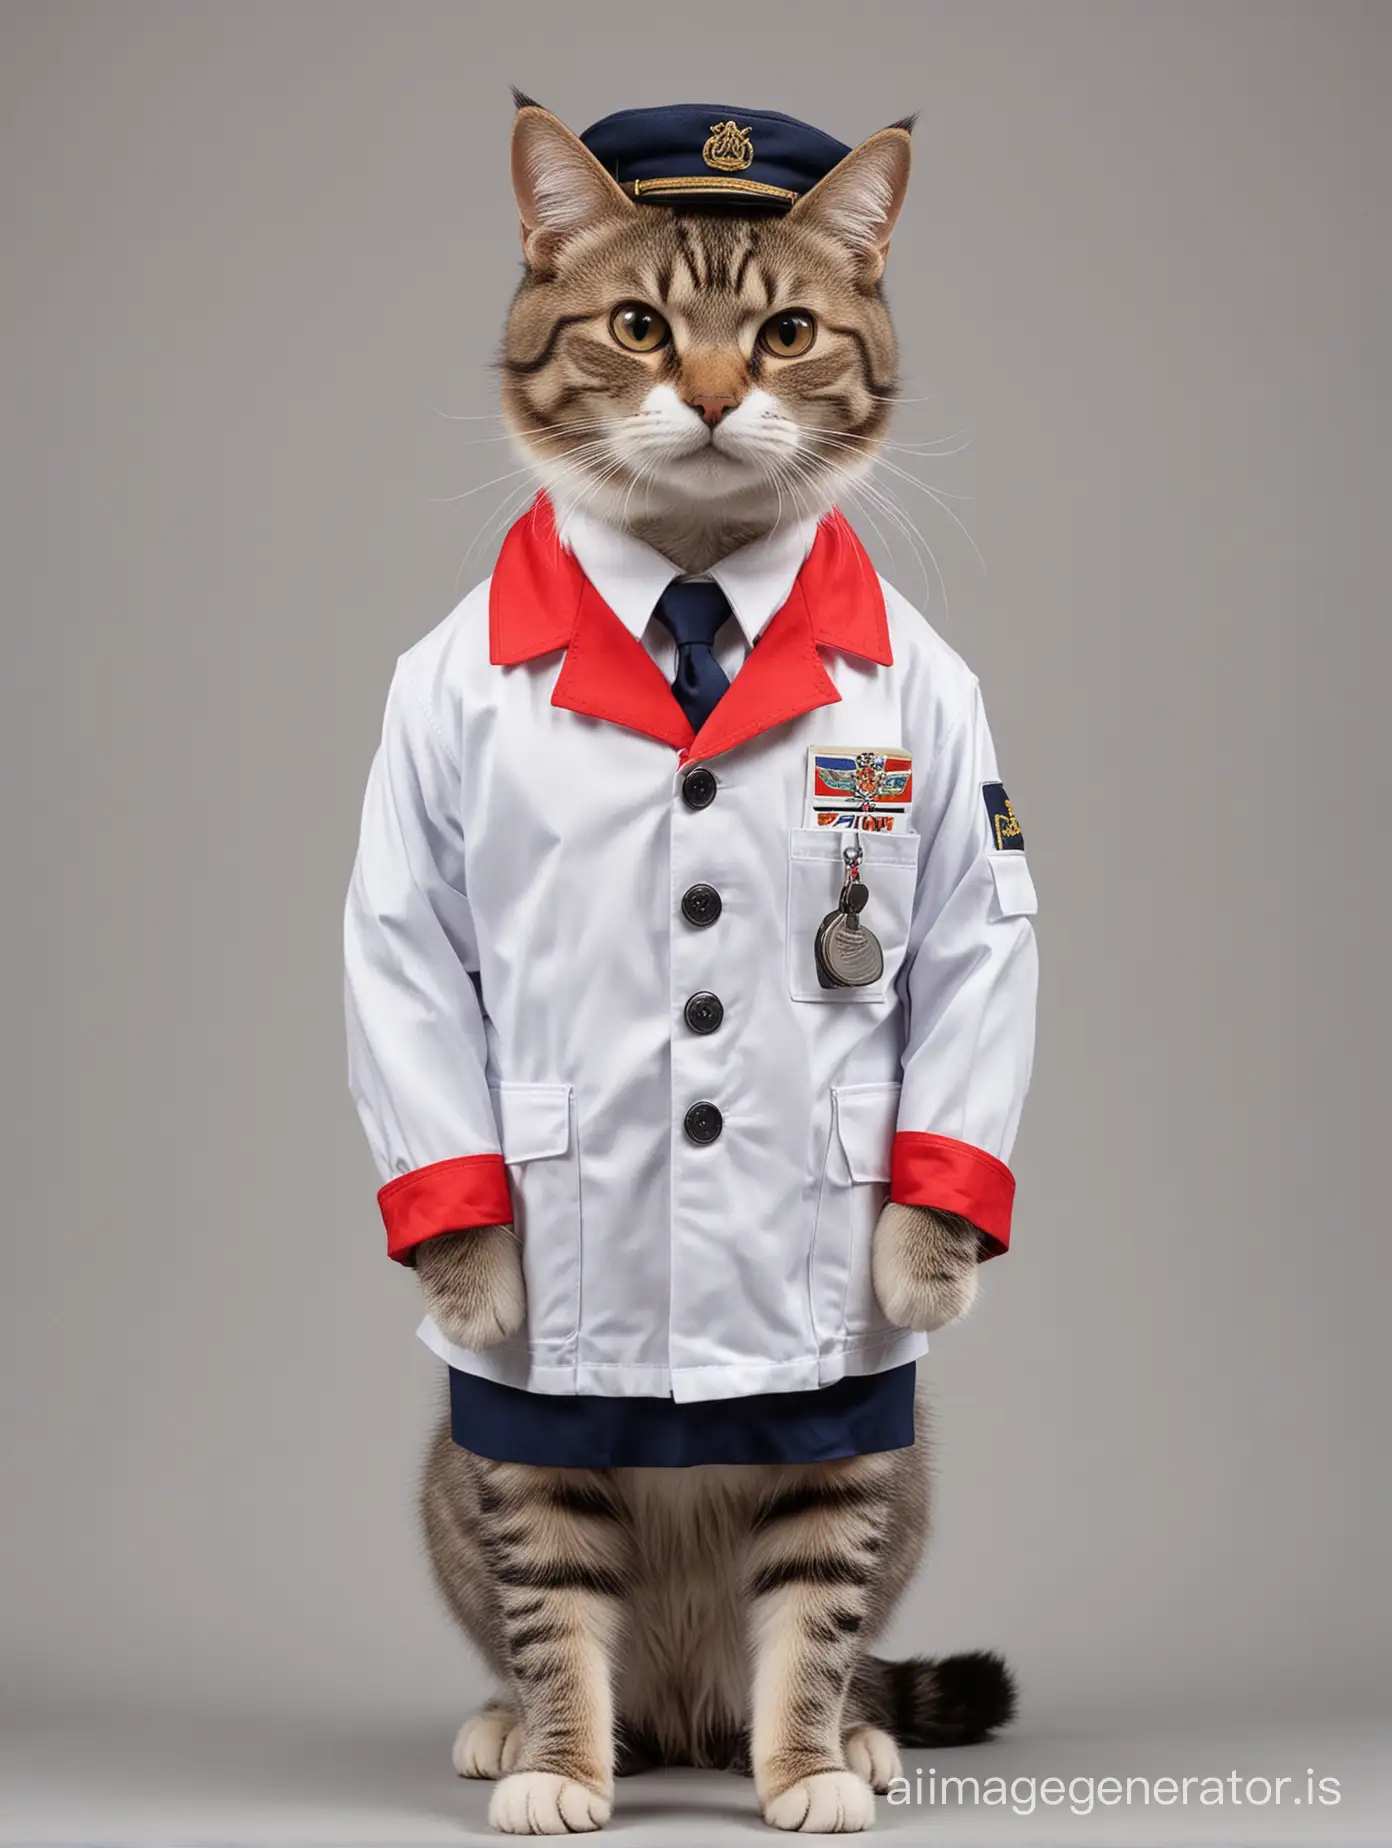 if a cat has a job what it is look like? mak it in a real positions with details. a cat who is post man and it is working as a post member. with postmen dress.